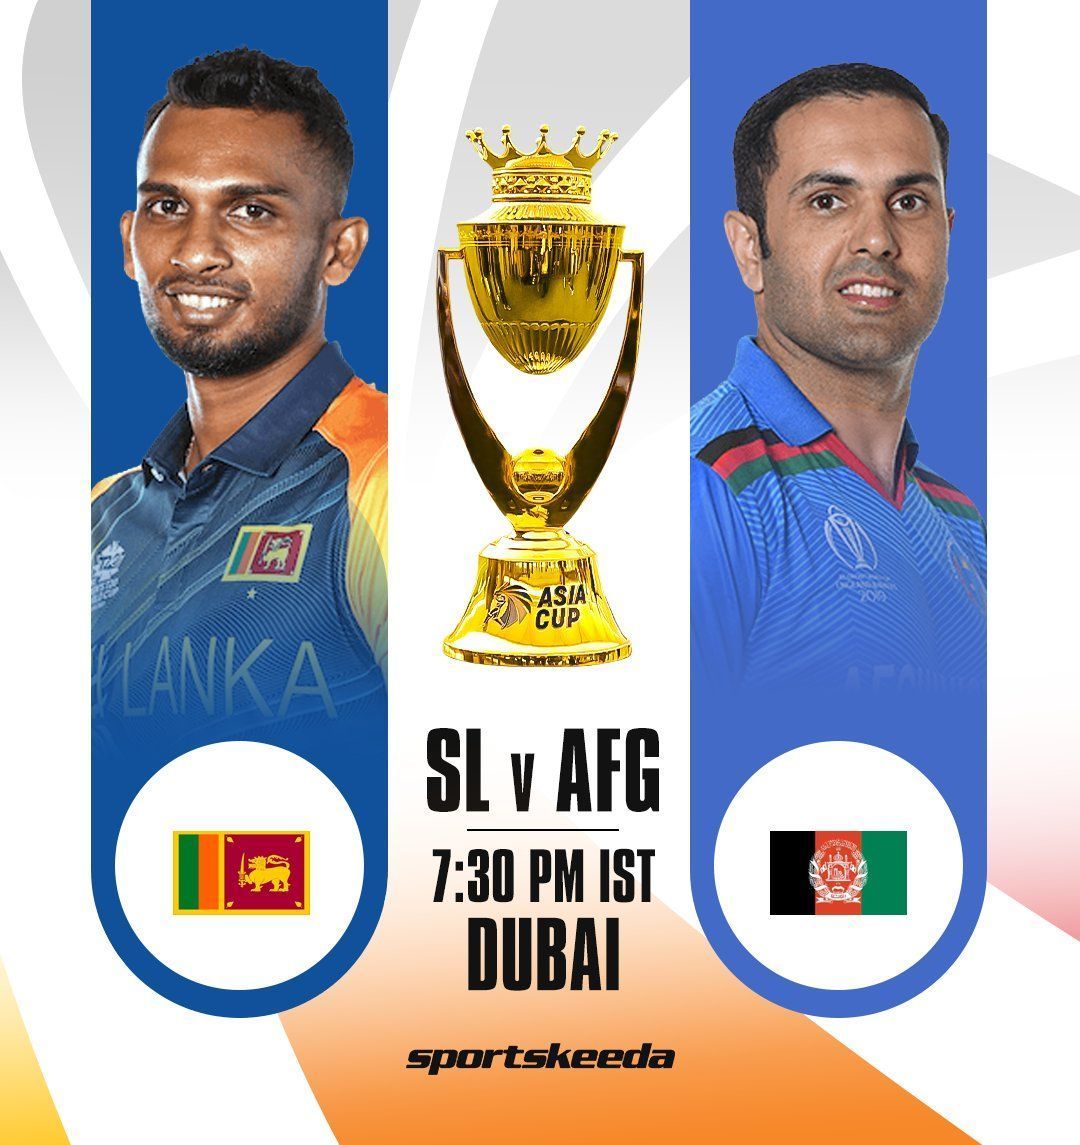 Sri Lanka are set to square off against Afghanistan in the first game of Super 4 stage [Pic Credit: Sportskeeda]